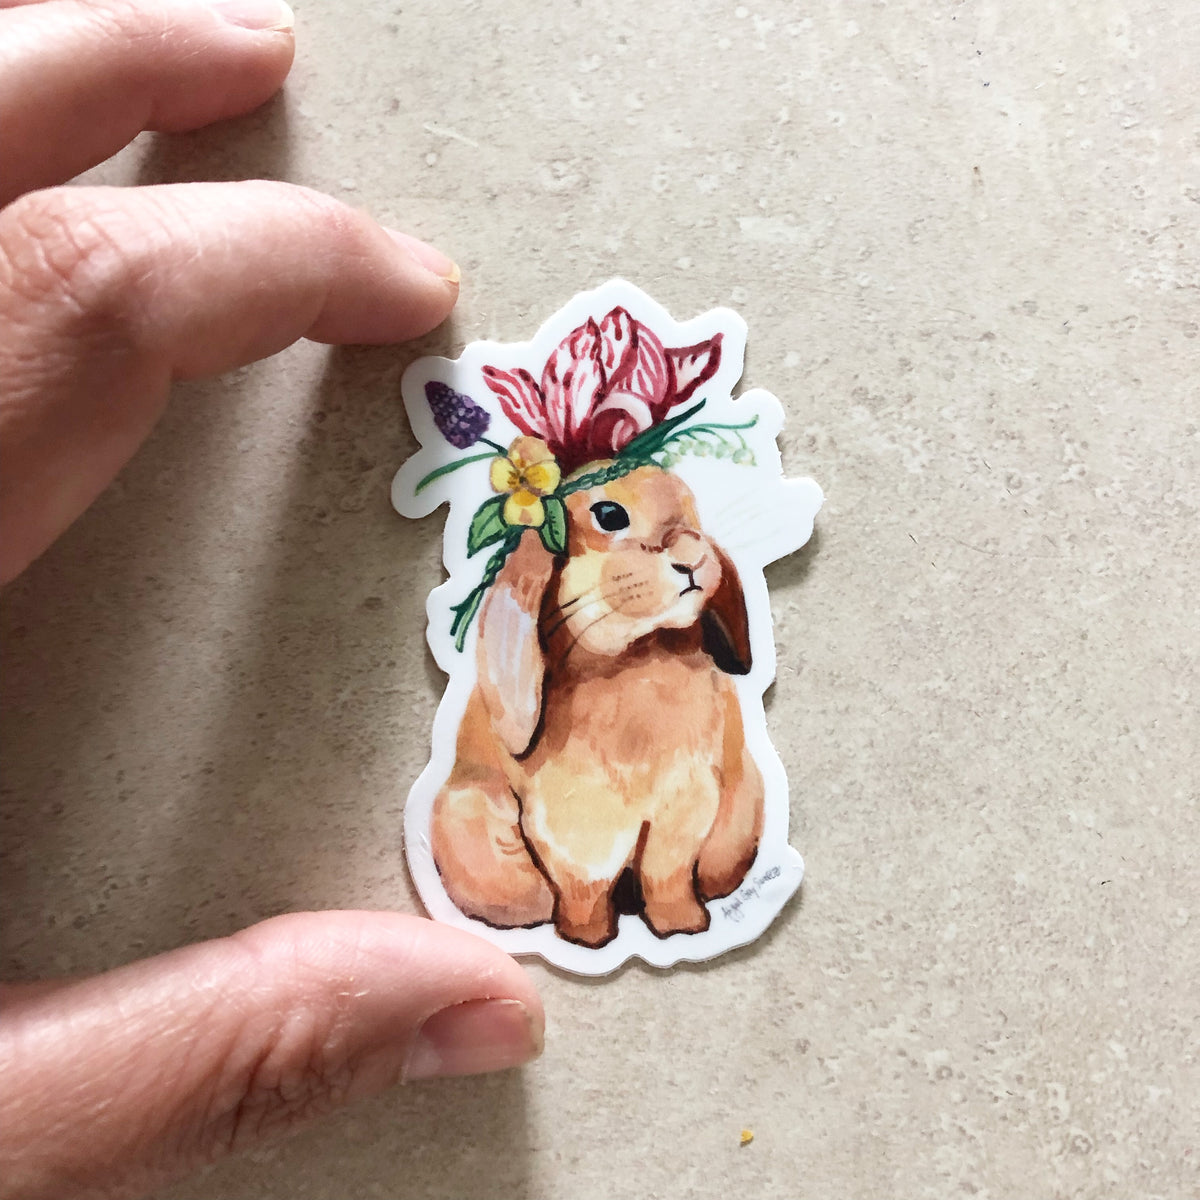 Bunny in flowers, portrait, animal STICKER, woodland creature- Stickers &amp; Magnets